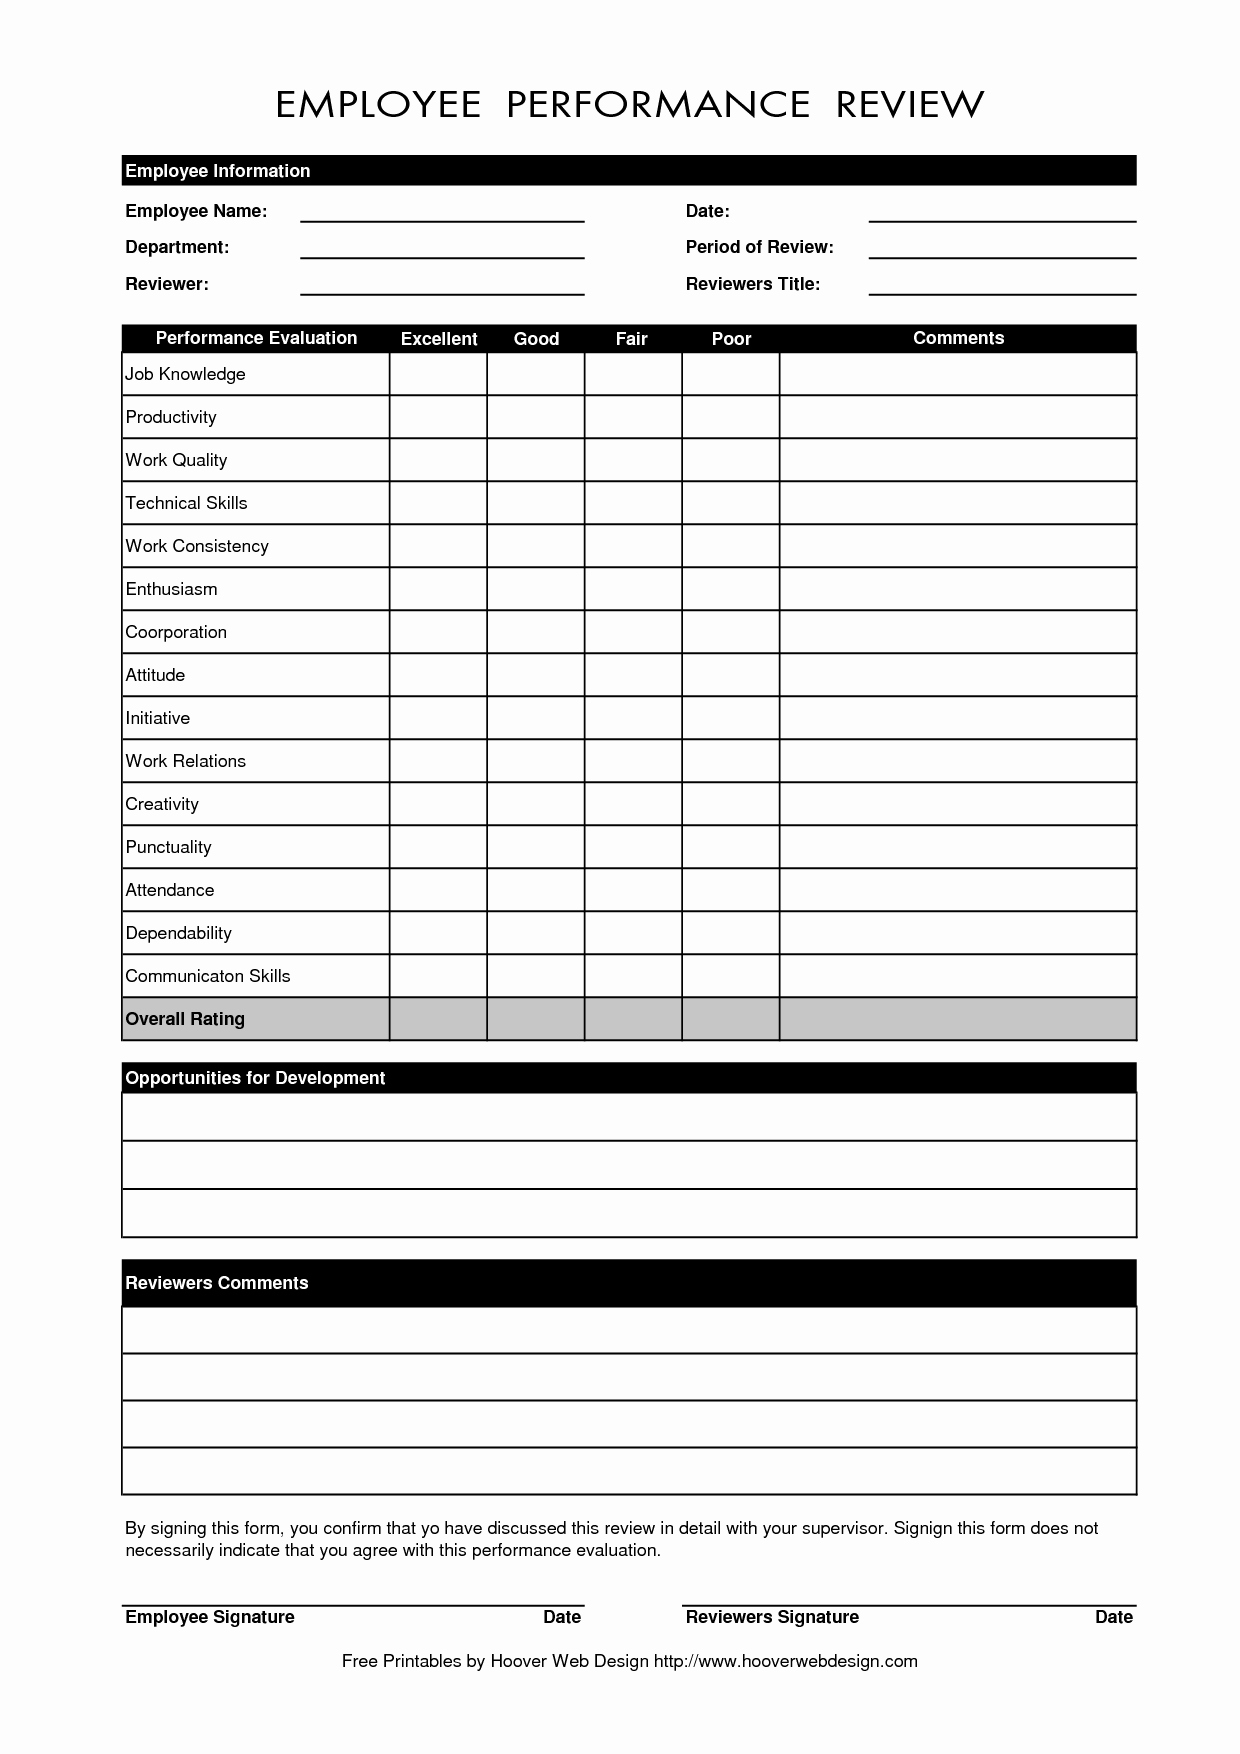 Employee Performance Review Template Excel Unique Free Employee Performance Evaluation form Template